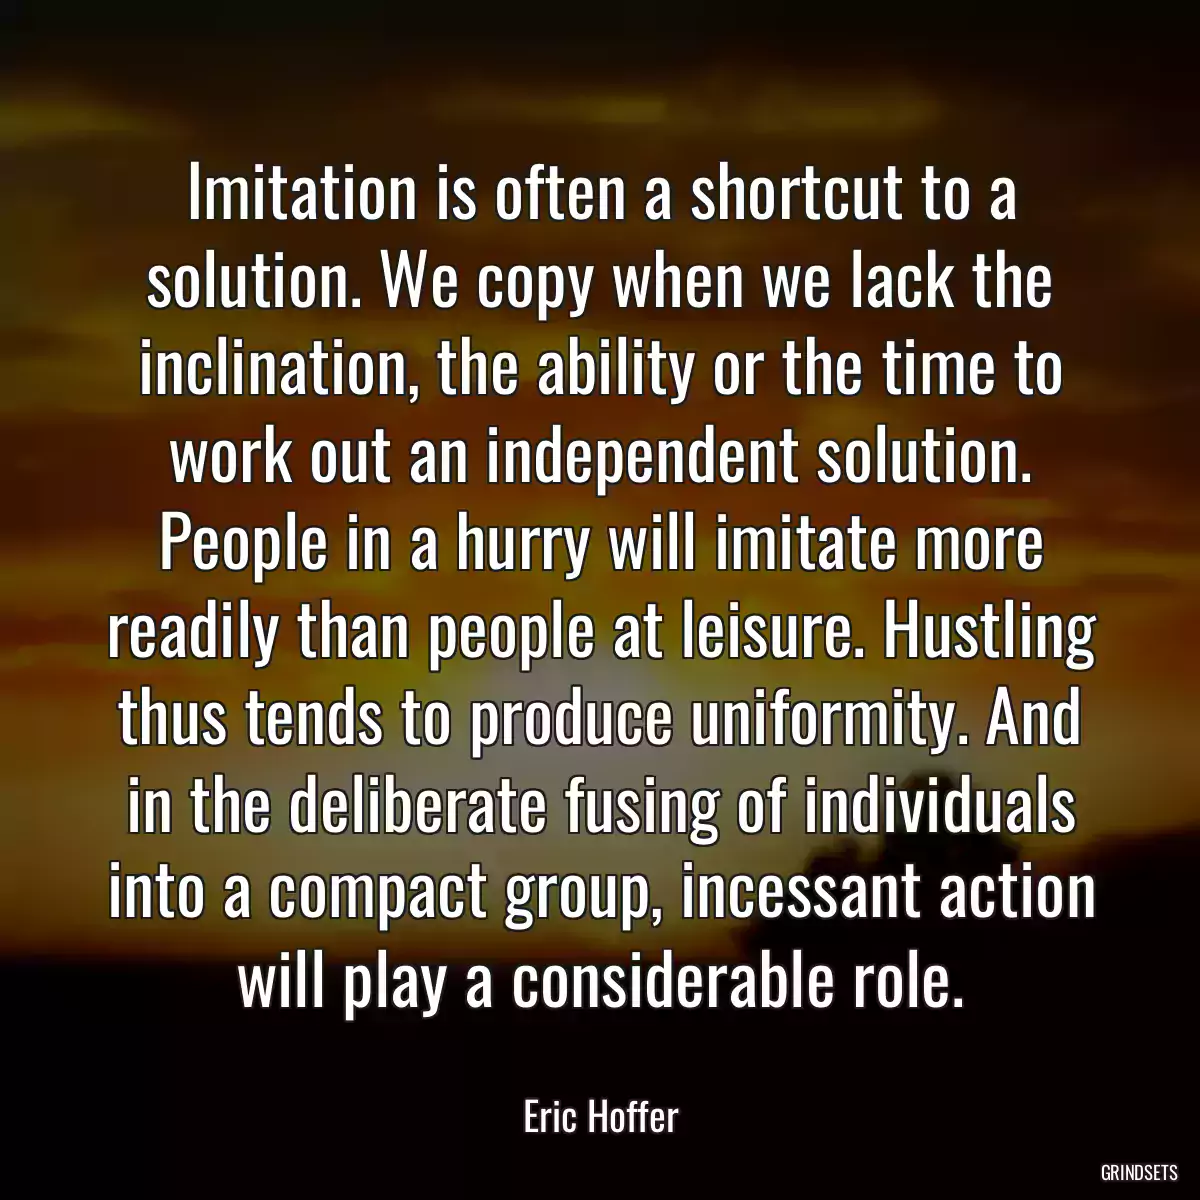 Imitation is often a shortcut to a solution. We copy when we lack the inclination, the ability or the time to work out an independent solution. People in a hurry will imitate more readily than people at leisure. Hustling thus tends to produce uniformity. And in the deliberate fusing of individuals into a compact group, incessant action will play a considerable role.